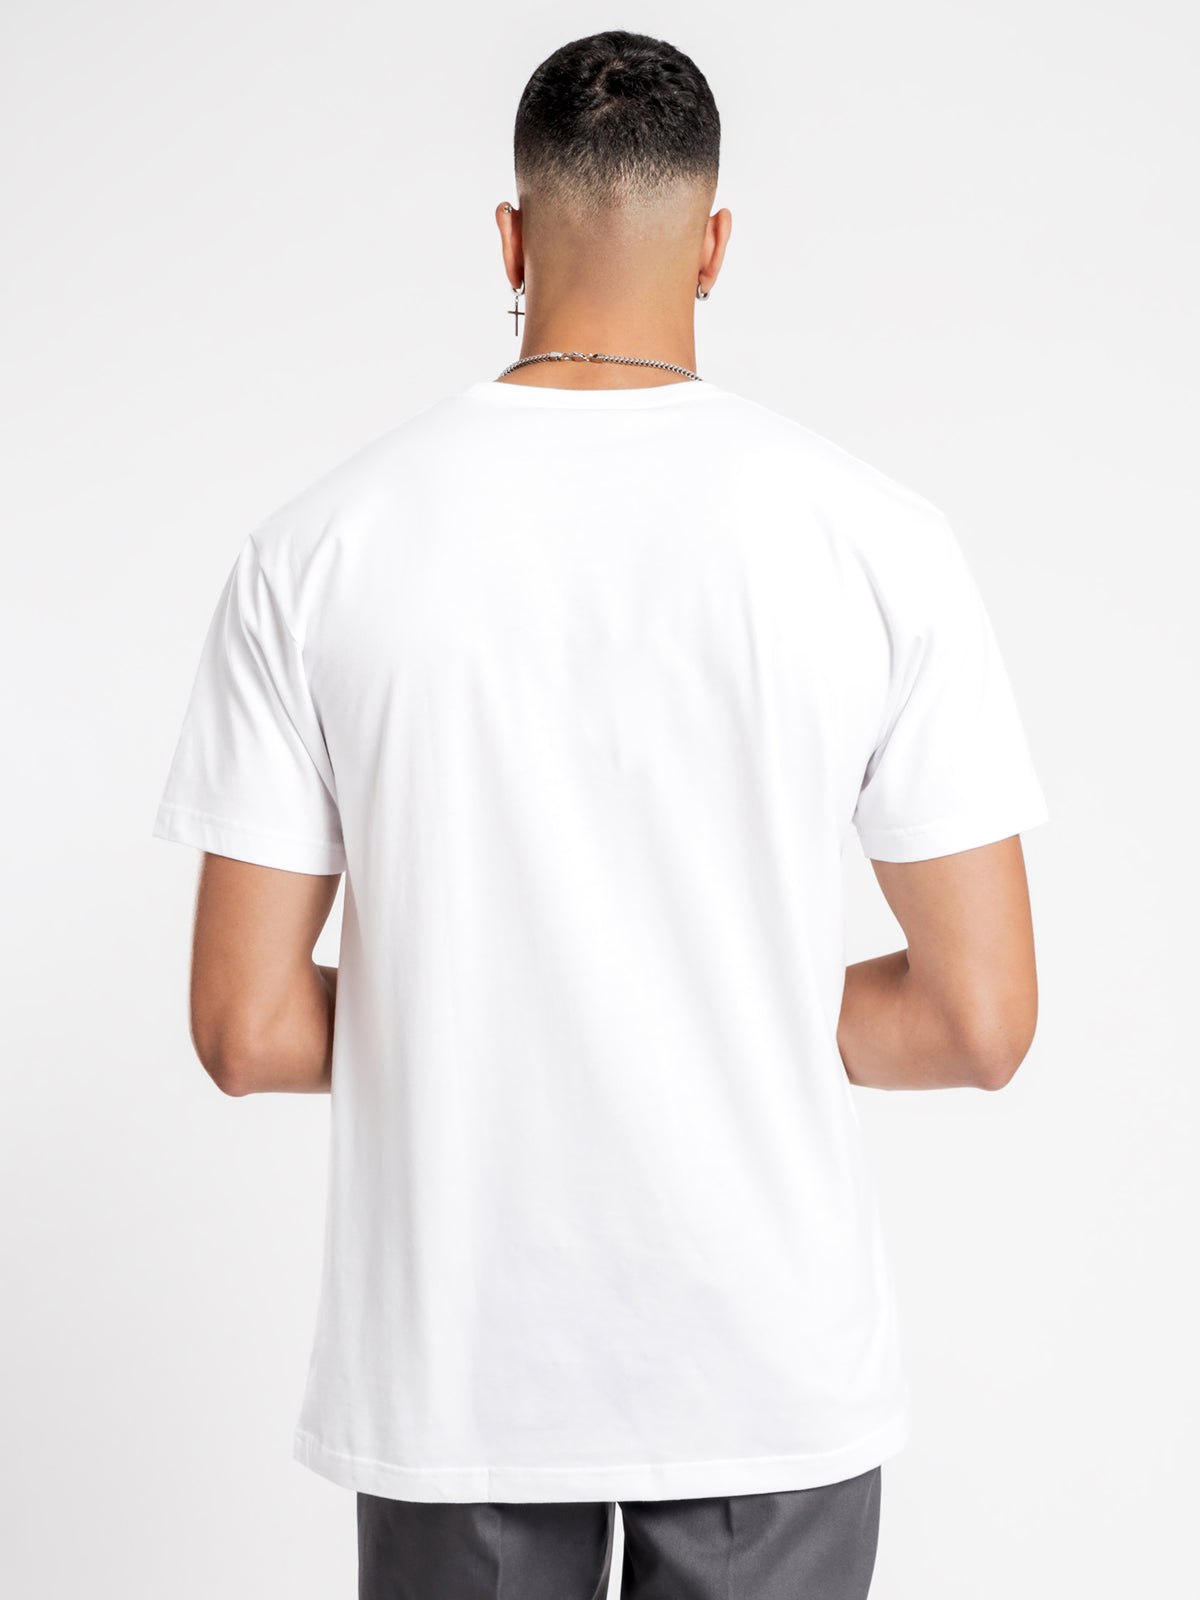 Duro Classic Fit Short Sleeve T-Shirt in White